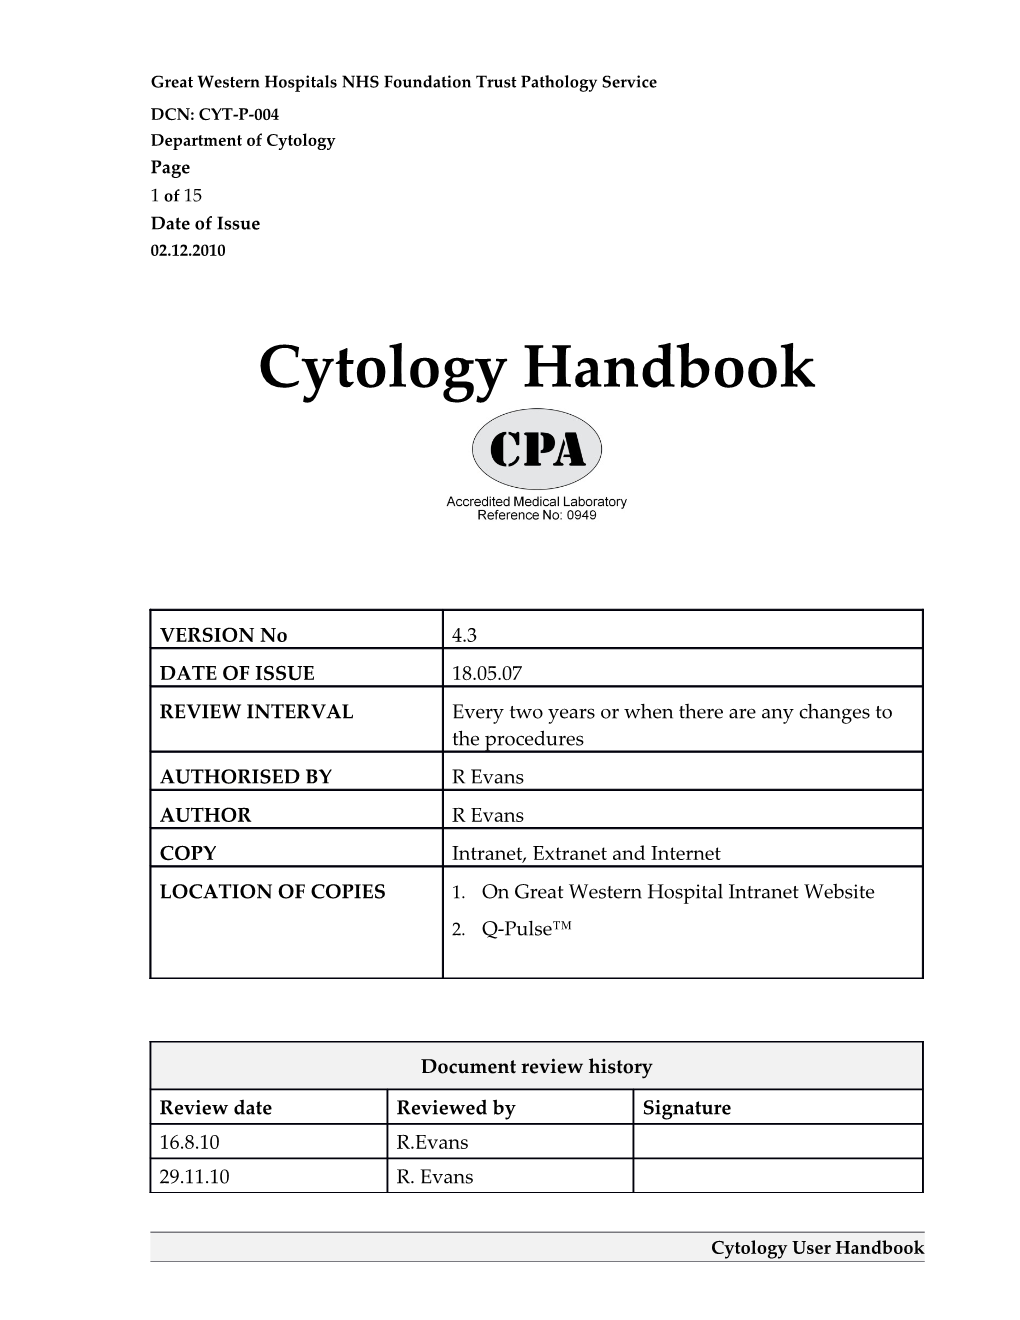 8Sample Requirements for Cytology Tests